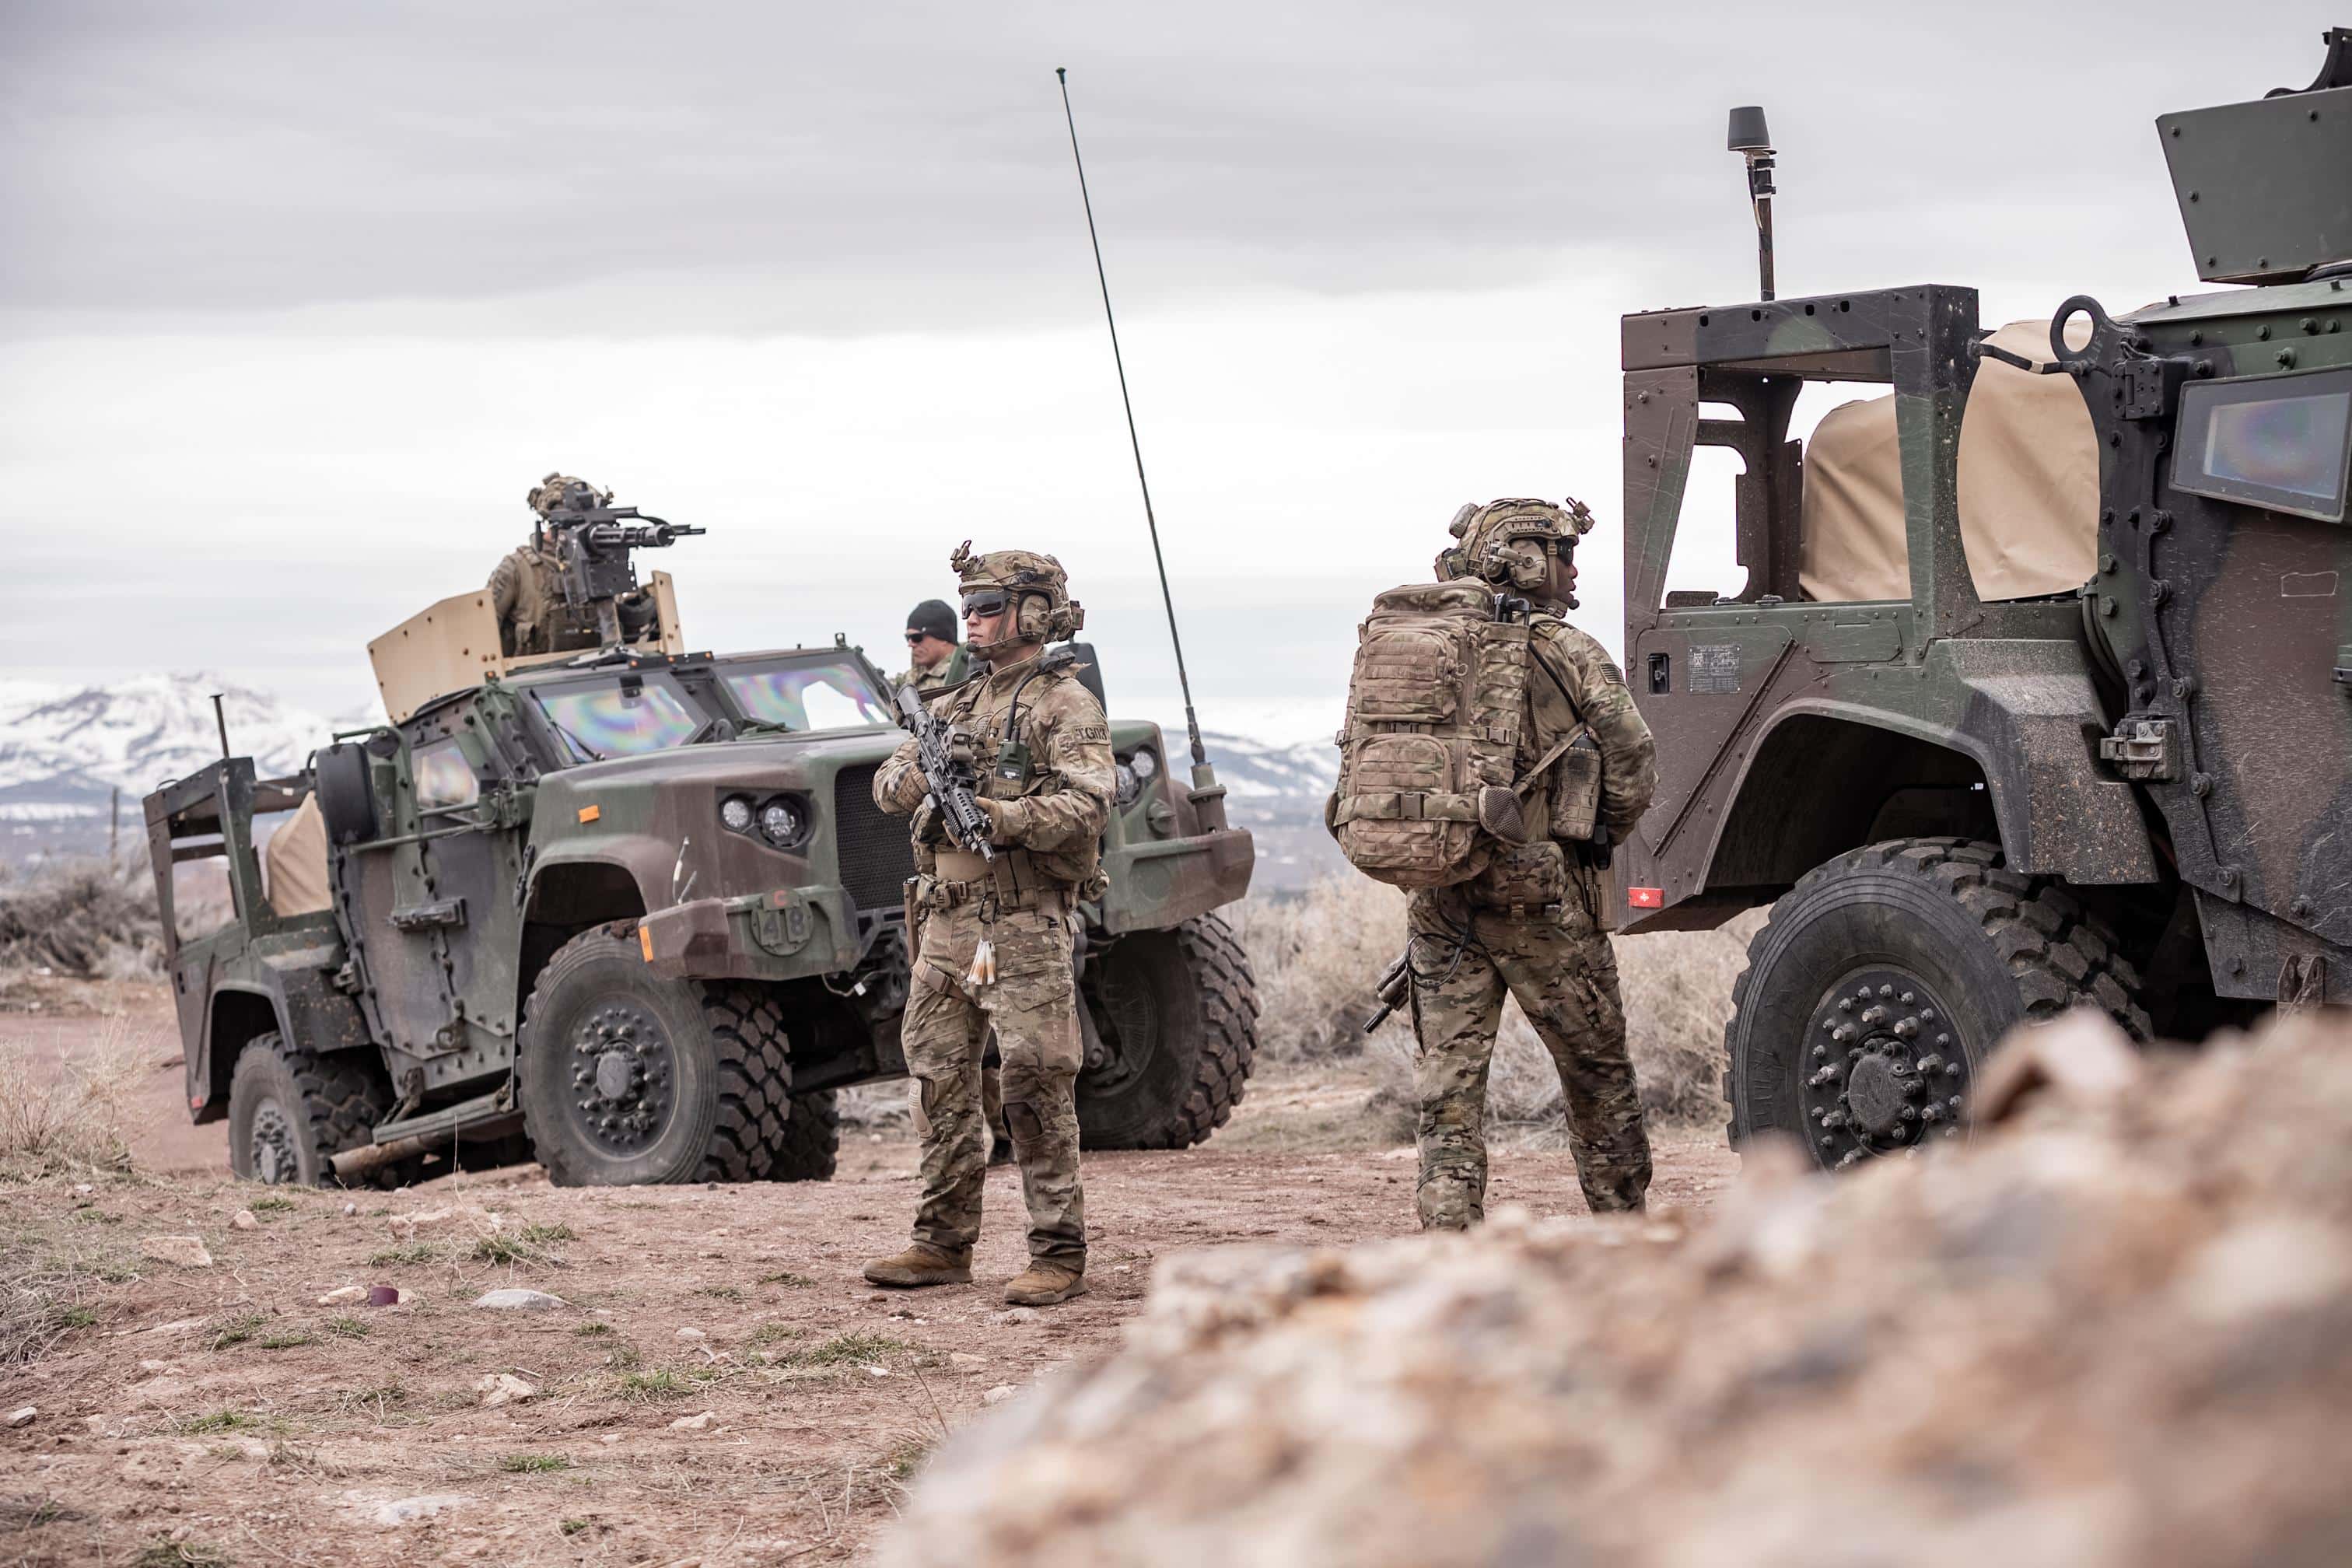 Operators with the 19th Special Forces Group (Airborne) train with the Joint Light Tactical Vehicle, or “Joltvee” near Camp Williams, Utah, April 14, 2023. The Joltvee is a highly advanced and capable vehicle designed to provide greater mobility, survivability, and lethality on the battlefield, developed through a joint program between the US Army, Marine Corps, and Oshkosh Defense to create a vehicle that could replace both the Humvee and the numerous variants of Mine-Resistant Ambush Protected (MRAP) vehicles.